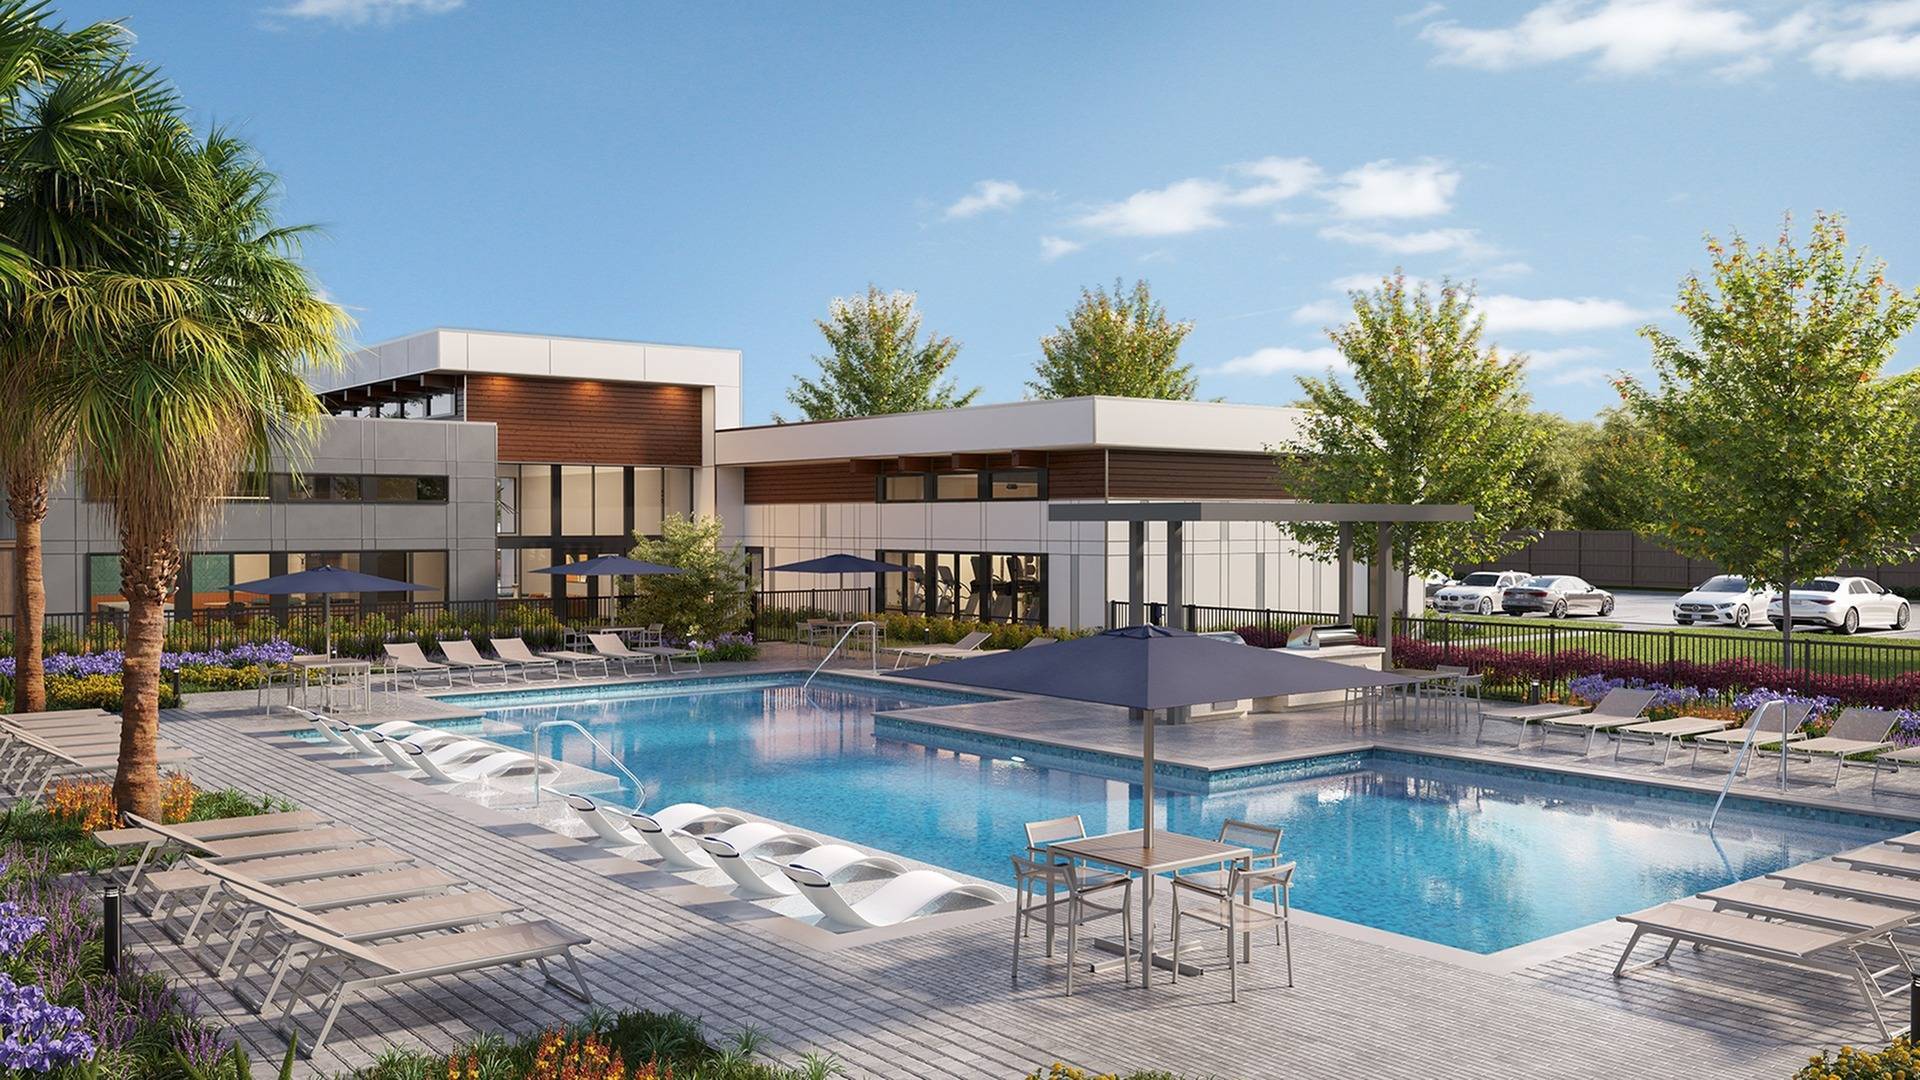 Rendering of Ltd. Med Center, the first apartment project under Greystar's new brand aimed at addressing a shortage of workforce housing. (CoStar)